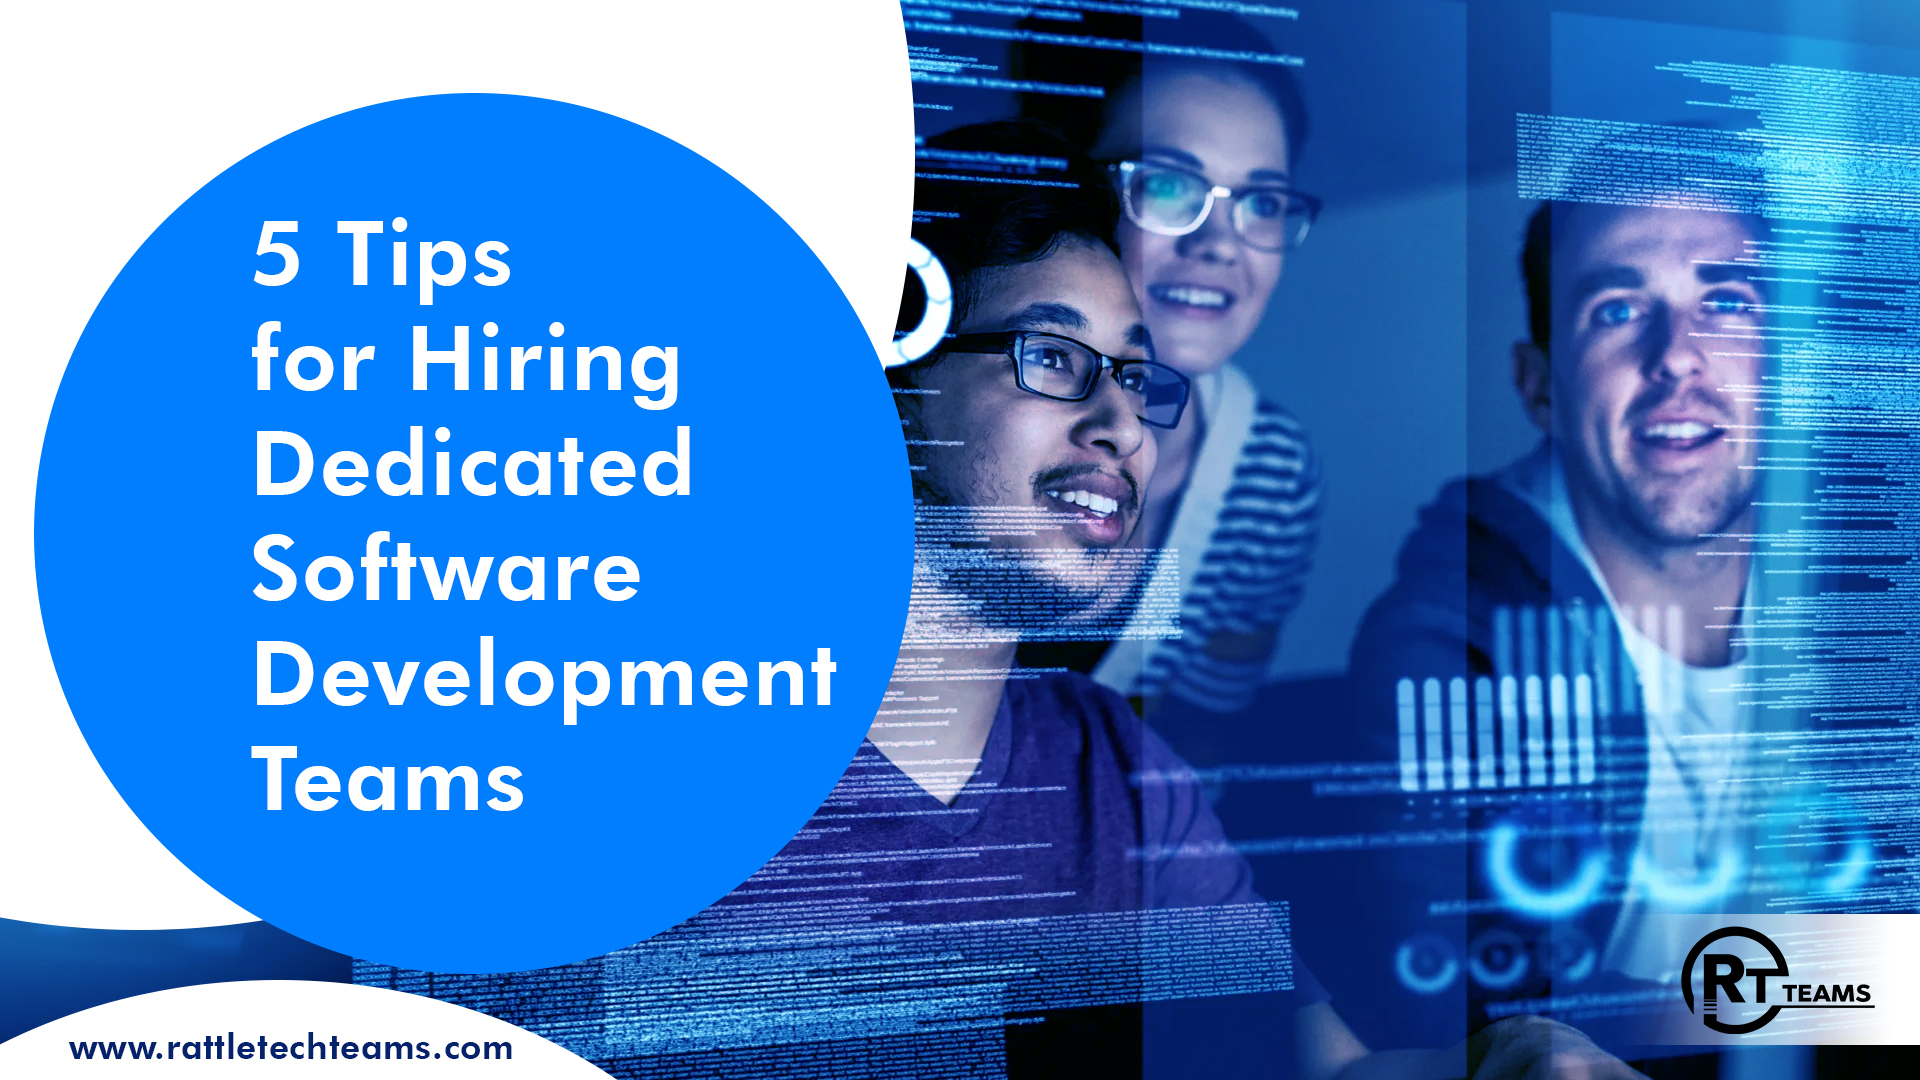 5 Tips for Hiring Dedicated Software Development Teams - Rattle Tech Teams